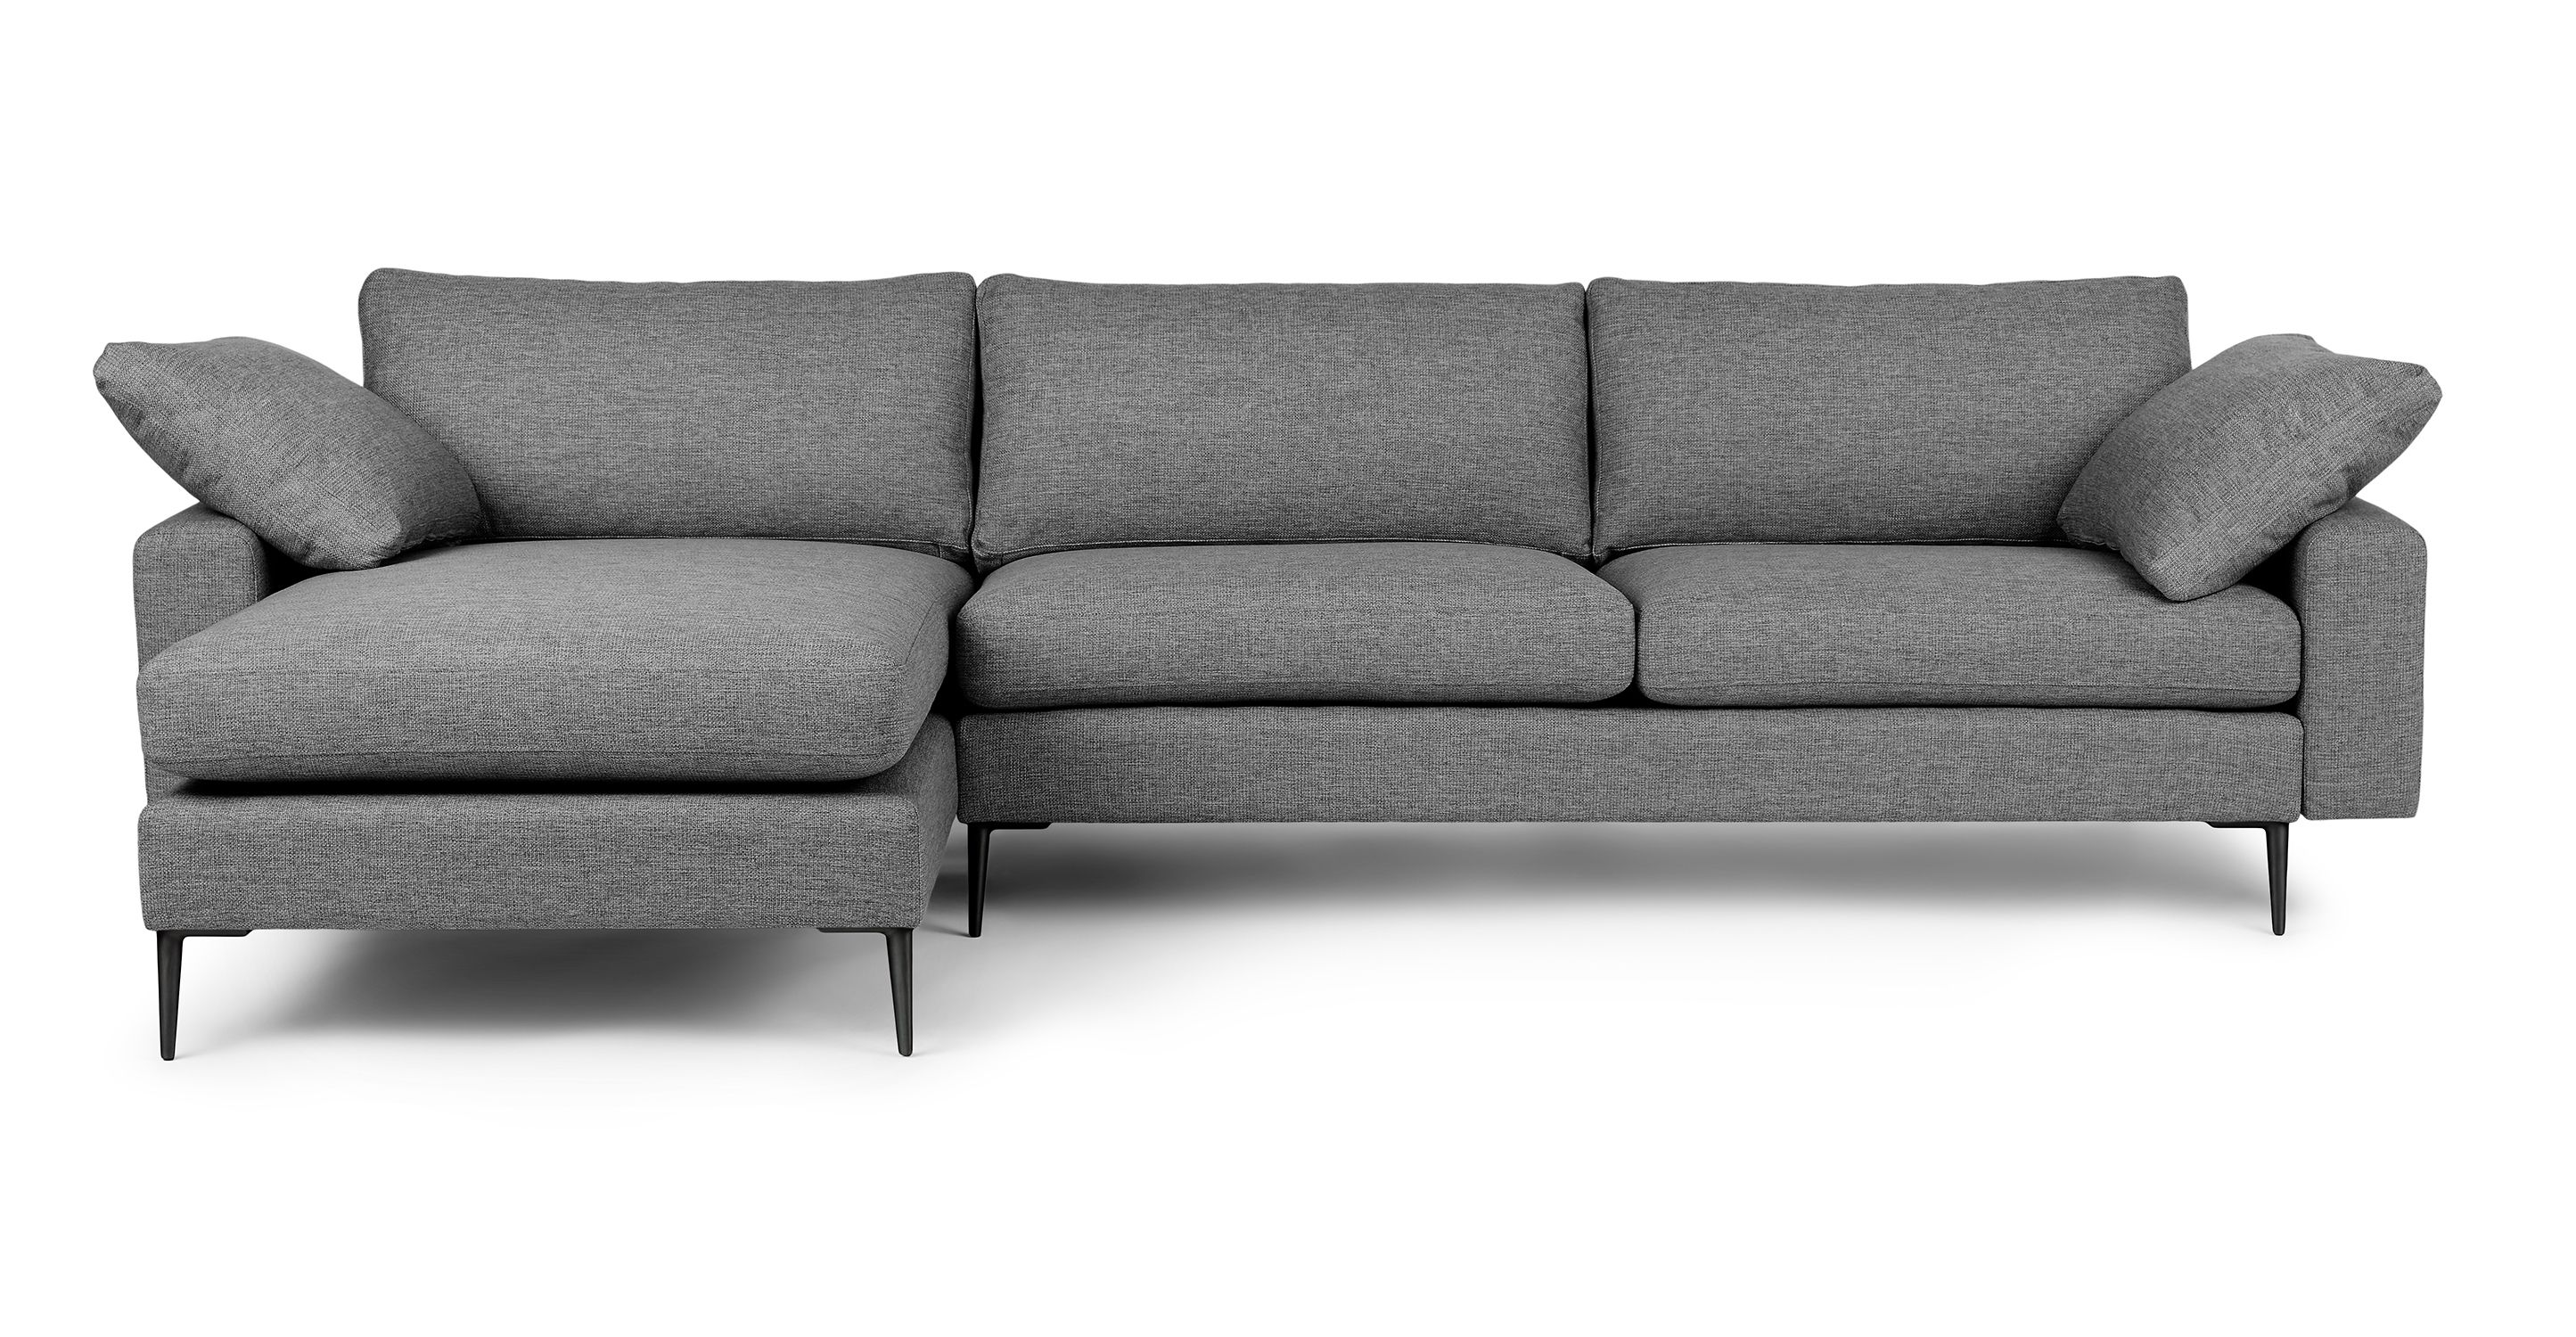 Gravel Gray Reversible Fabric Sectional | Nova | Article Within Reversible Sectional Sofas (View 4 of 20)